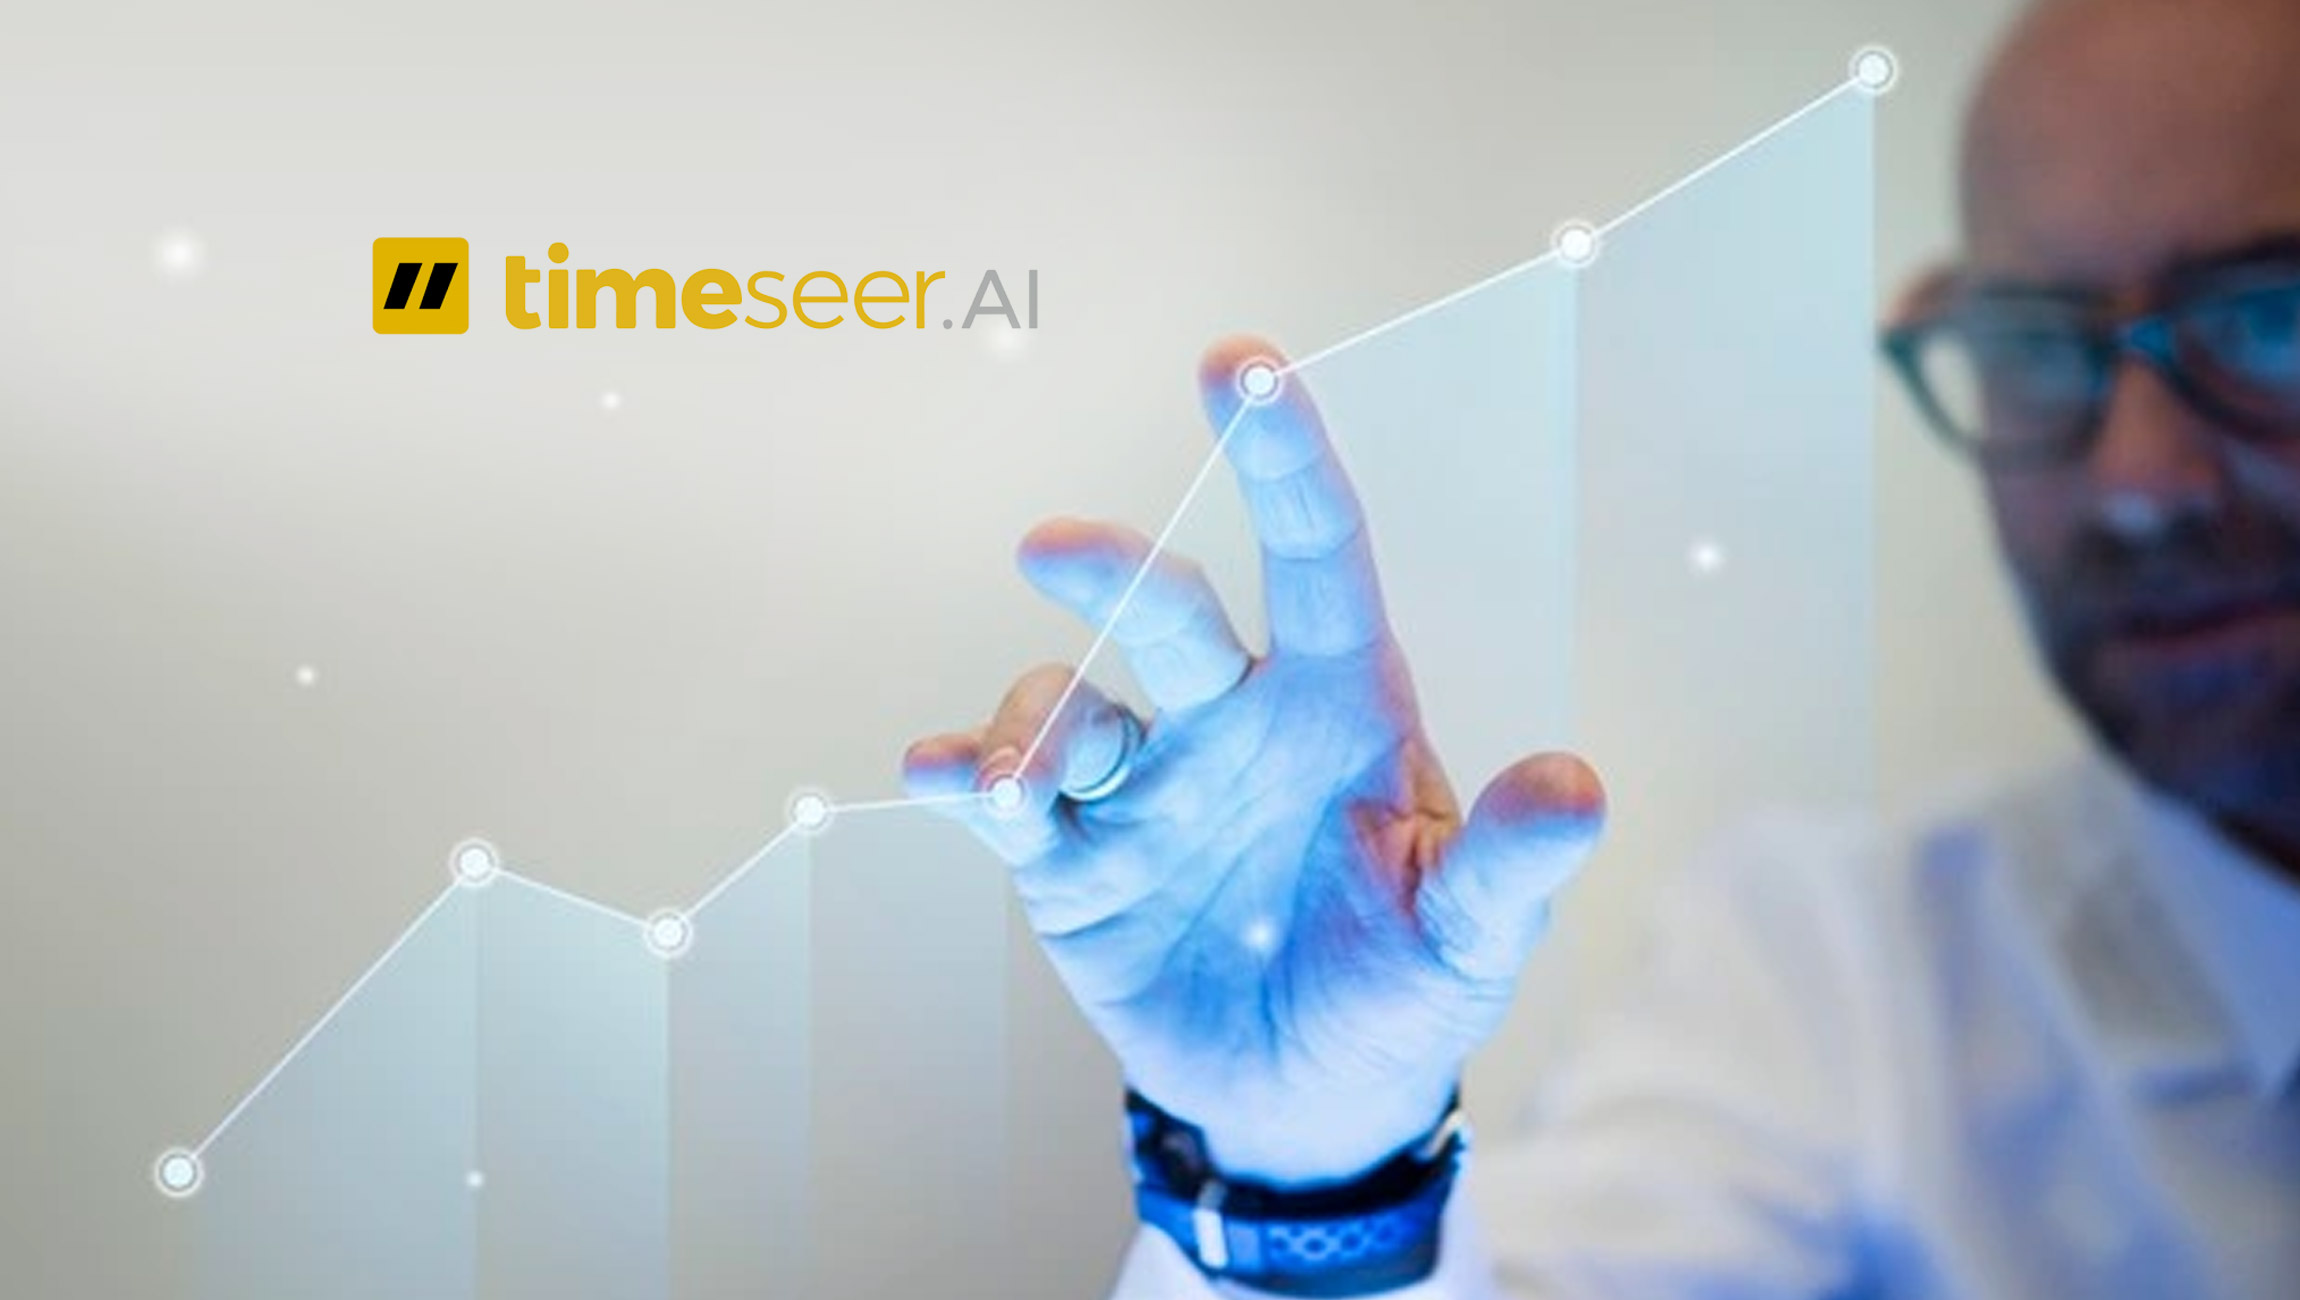 Timeseer.AI Raises $6 Million Seed Round to Accelerate Growth in the Time-Series Data Reliability/Observability Market